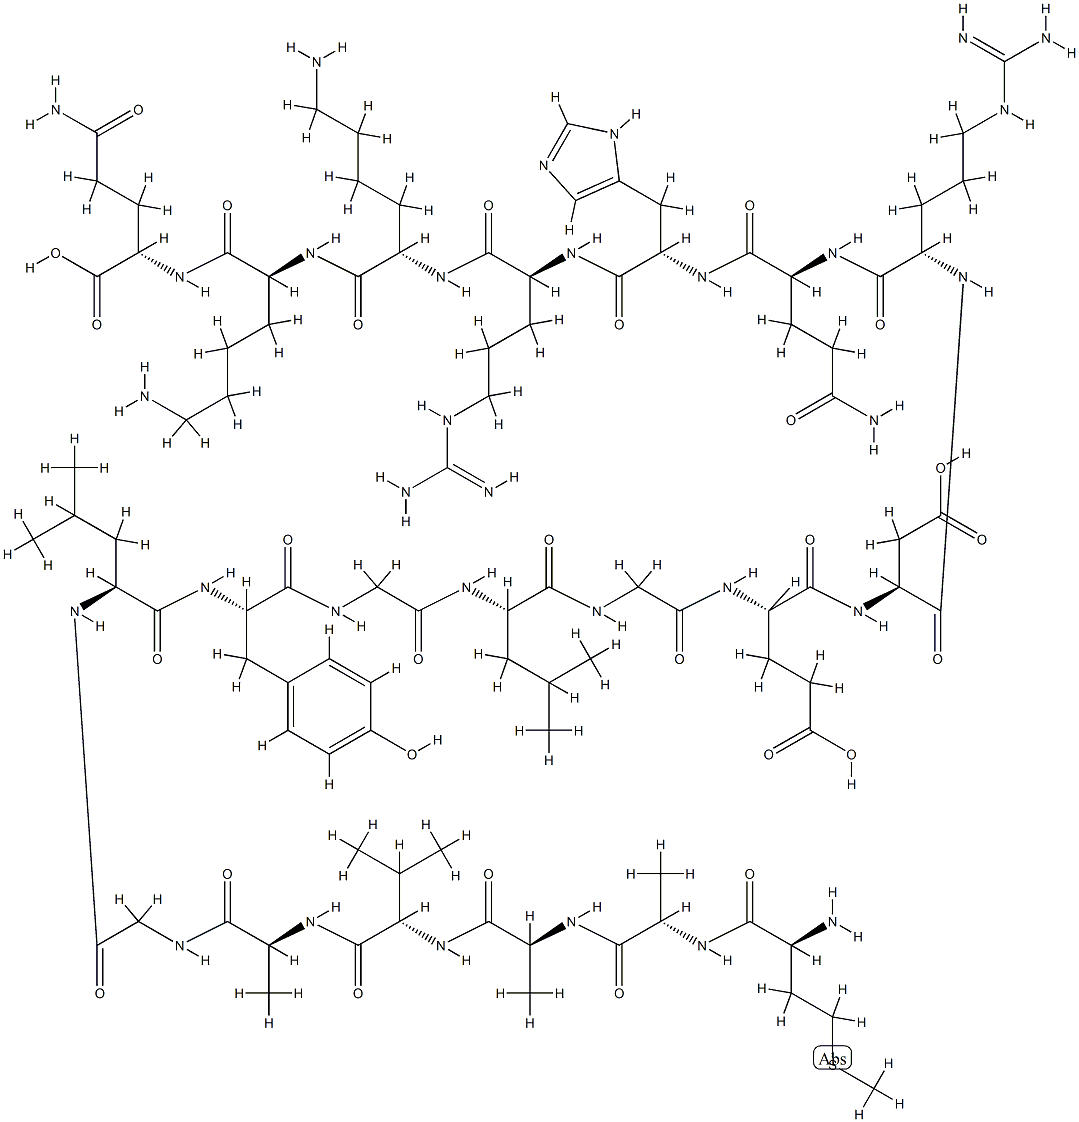 Shaker B inactivating peptide,144119-58-4,结构式